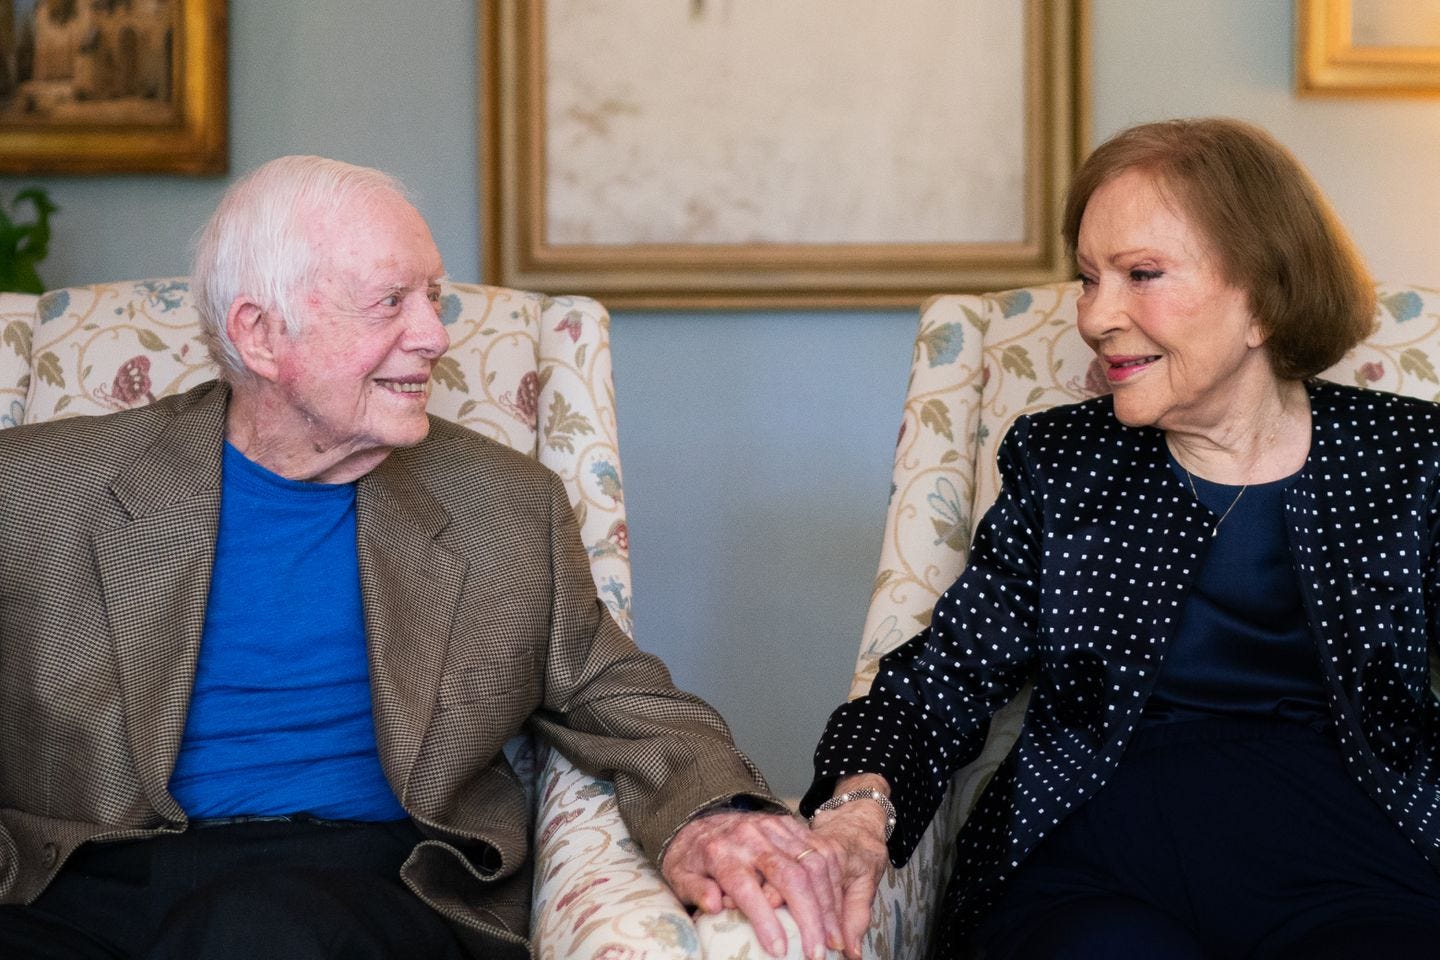 Former President Jimmy Carter and his wife, Rosalynn Carter, at their home in Plains, Ga., June 25, 2021.